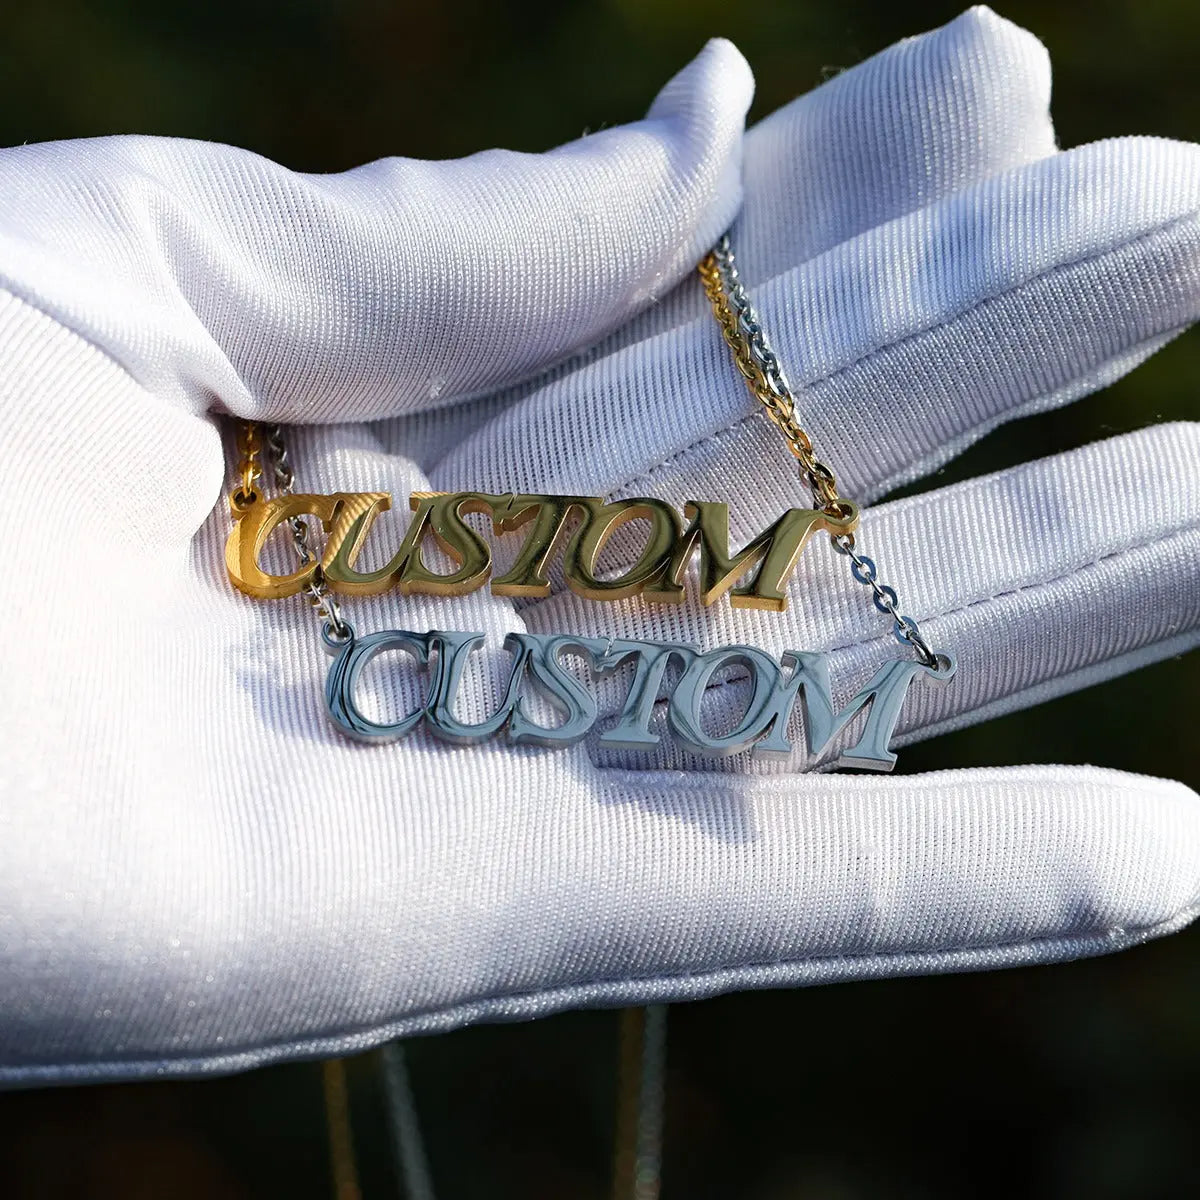 Custom Stainless Steel Name Necklace   The Icetruck